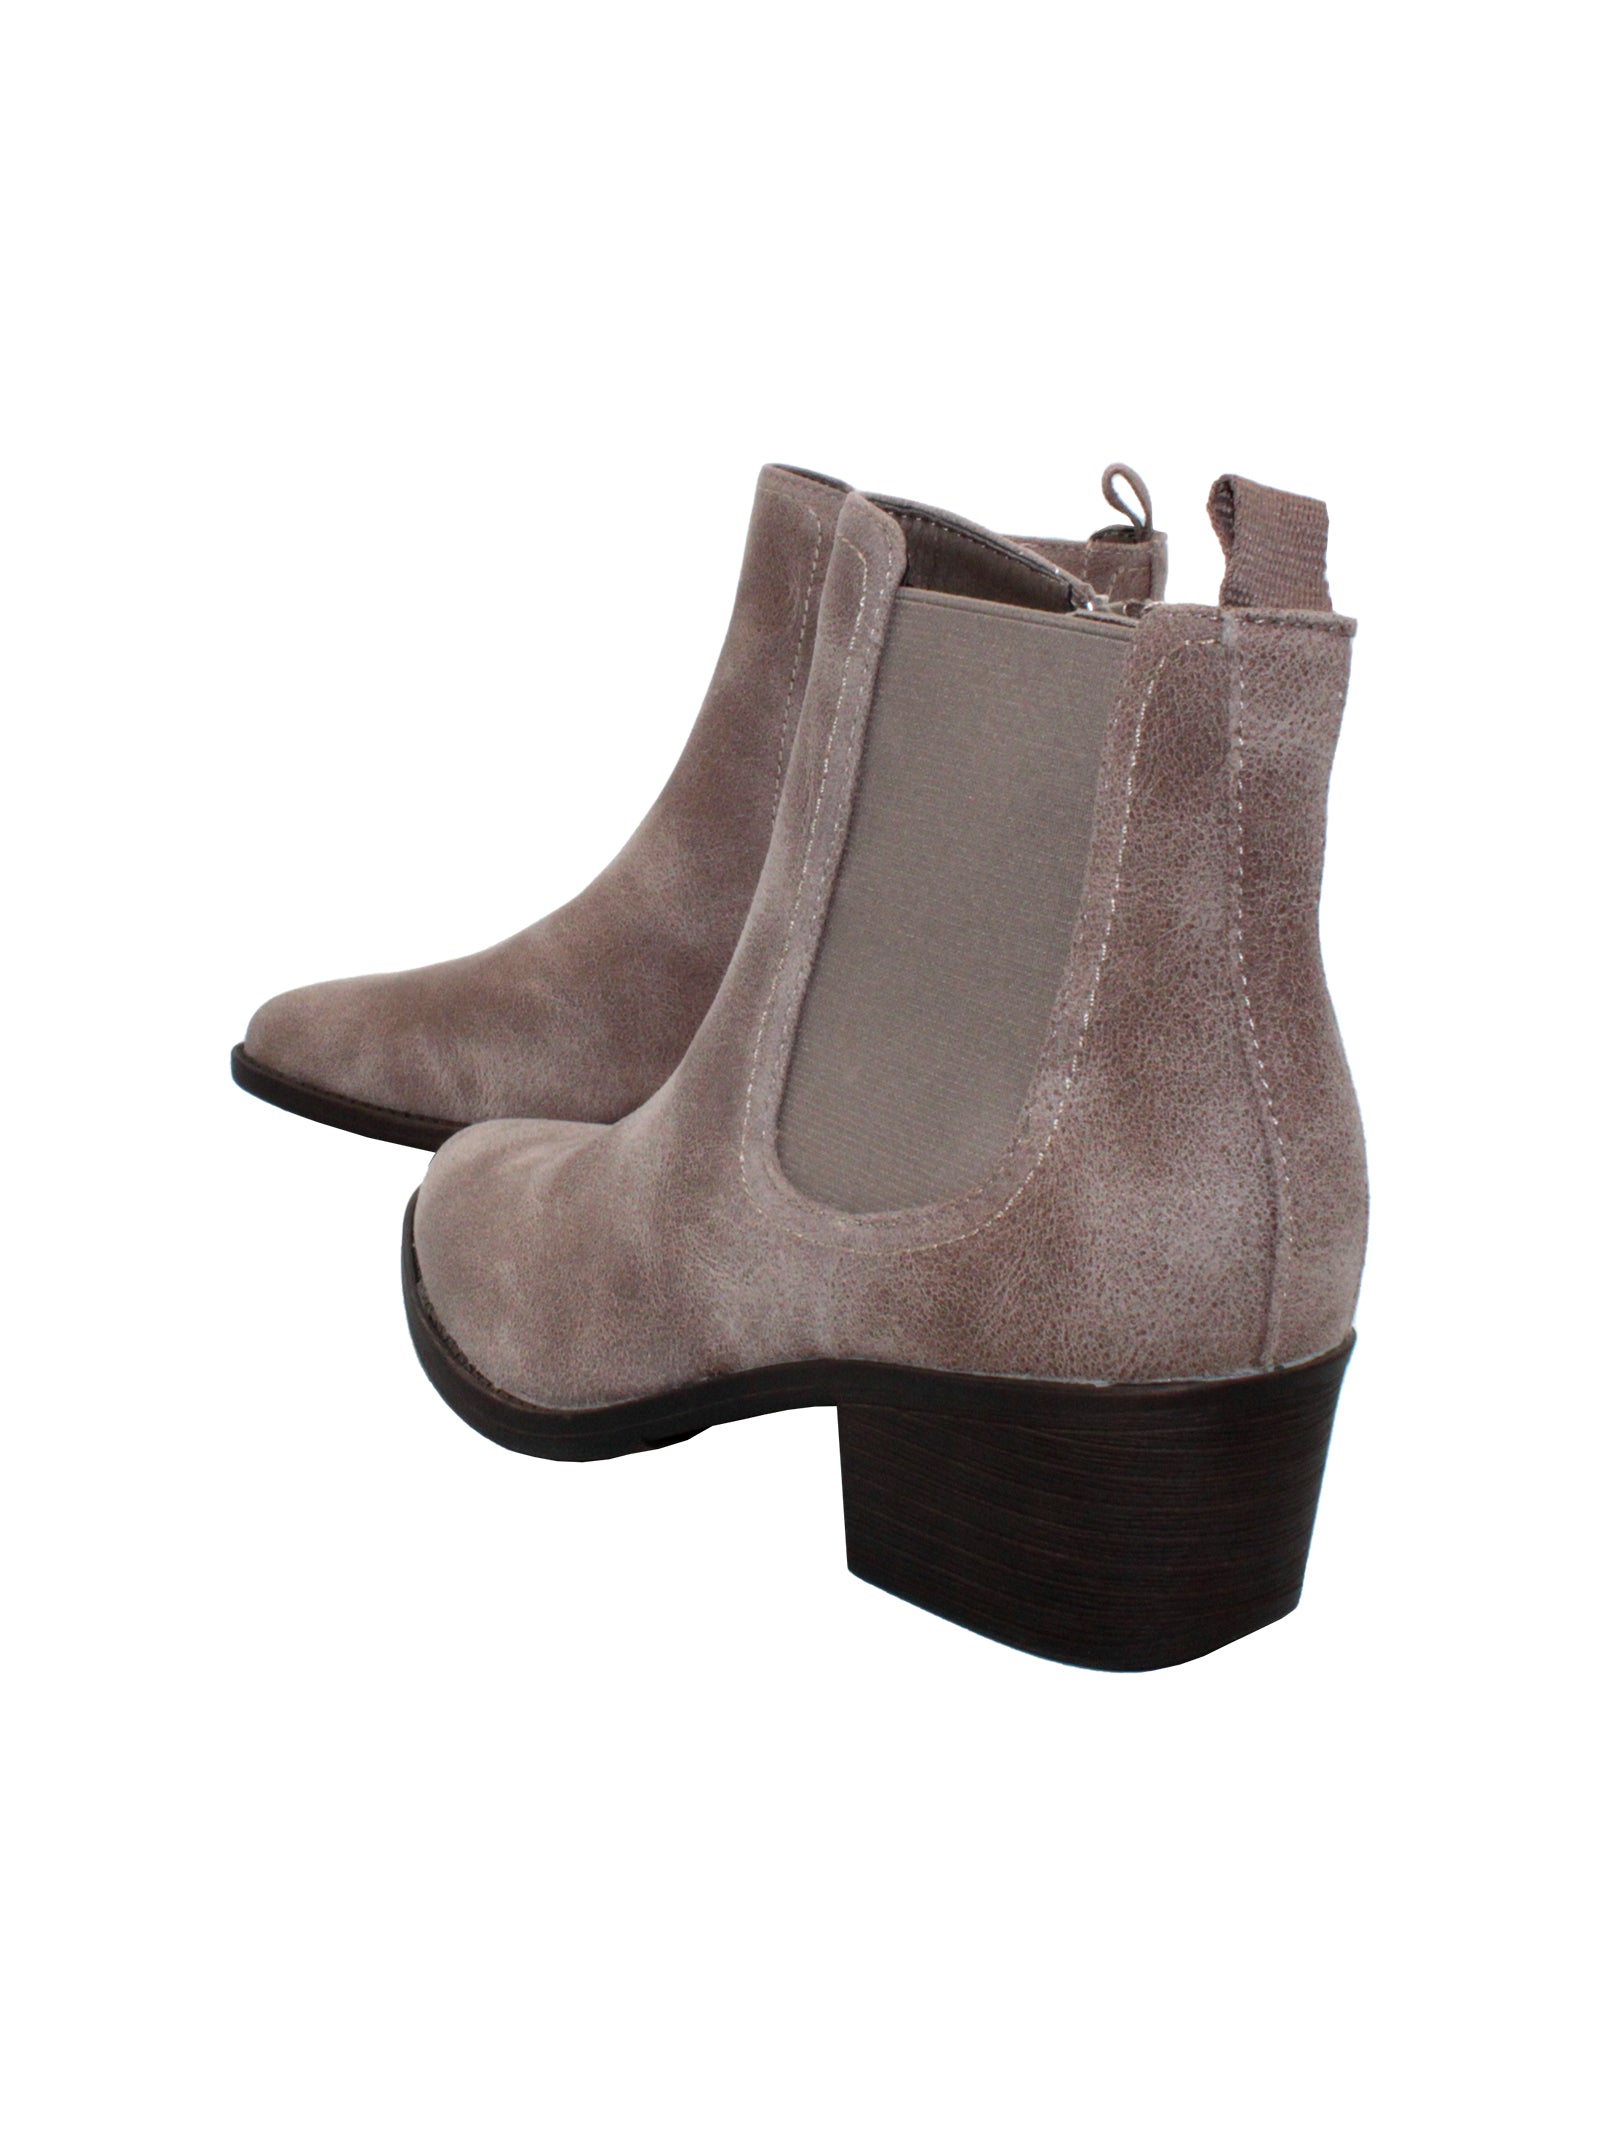 The ‘Carriage’ Chelsea bootie by Volatile, in beautiful rustic effect faux leather or matte metallic faux snake, is right on trend with a wide elastic side panel allowing for flexibility and comfort while walking. We took the level of ease a step further by adding an inside zipper, making these booties effortless to put on and off.  stone bavck